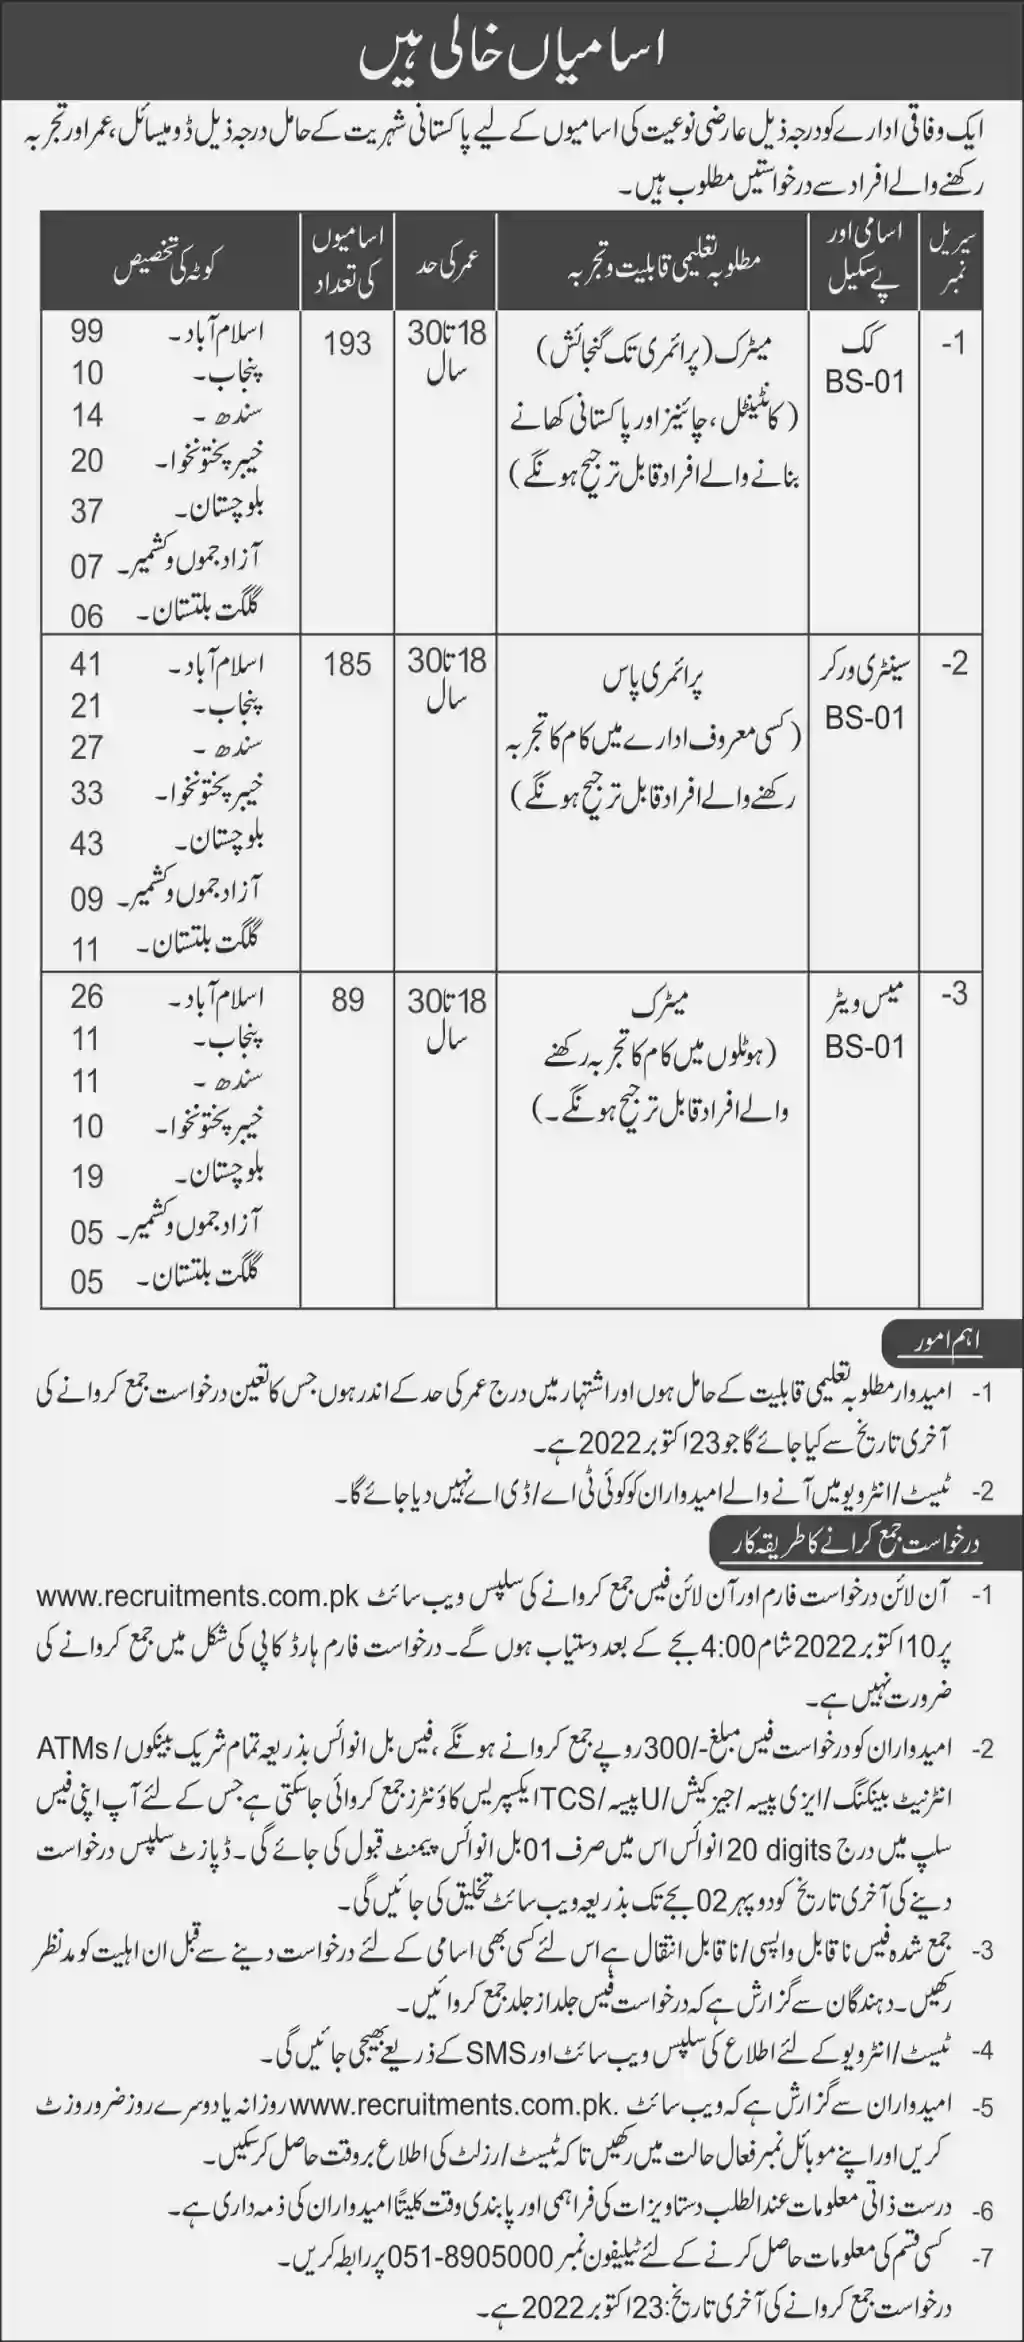 Ministry of Defence Pakistan Latest Jobs Updates